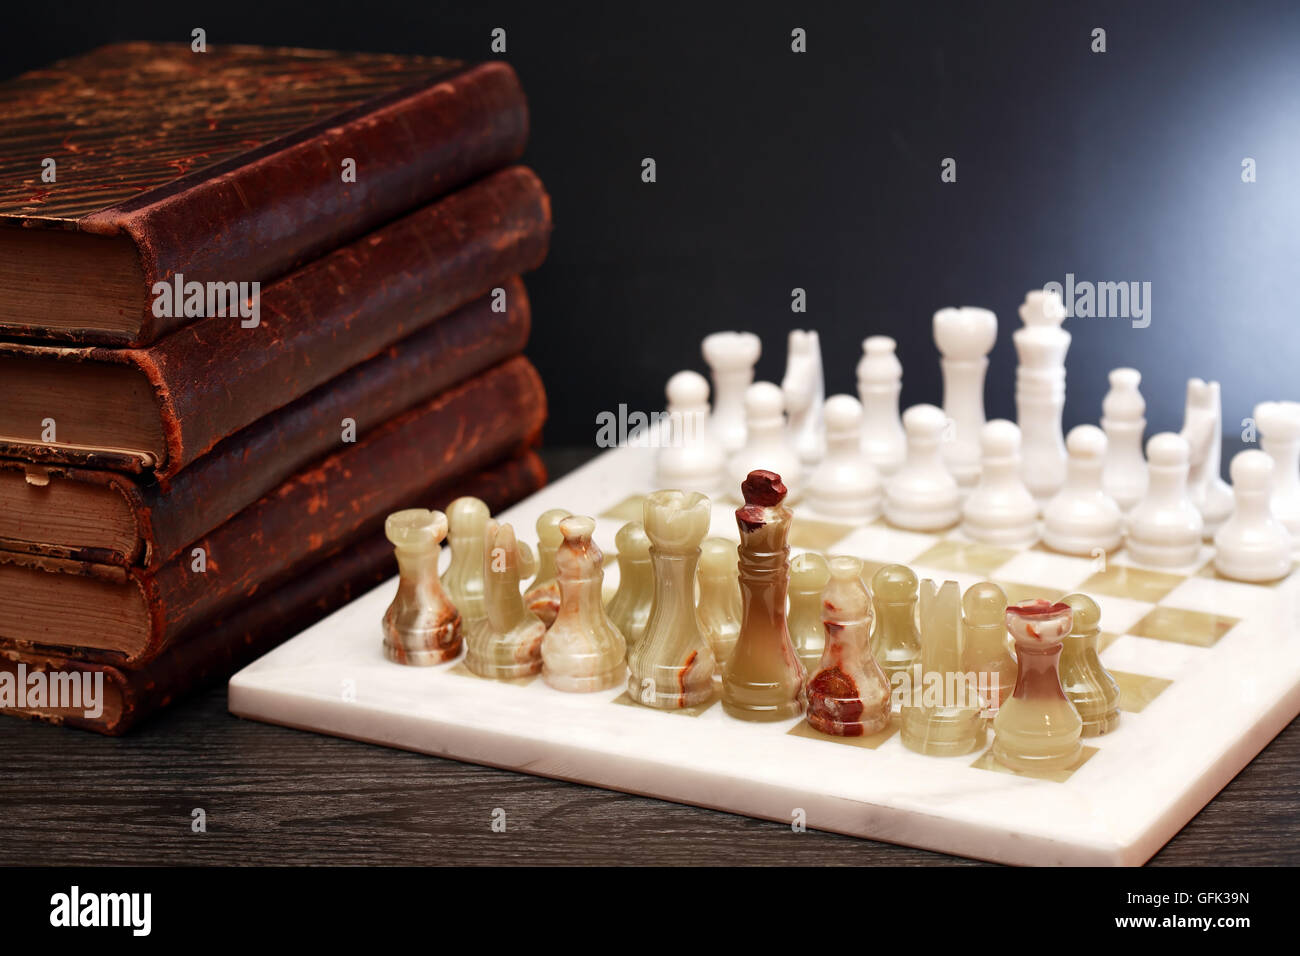 Set of chess pieces made from Onyx on board near books Stock Photo